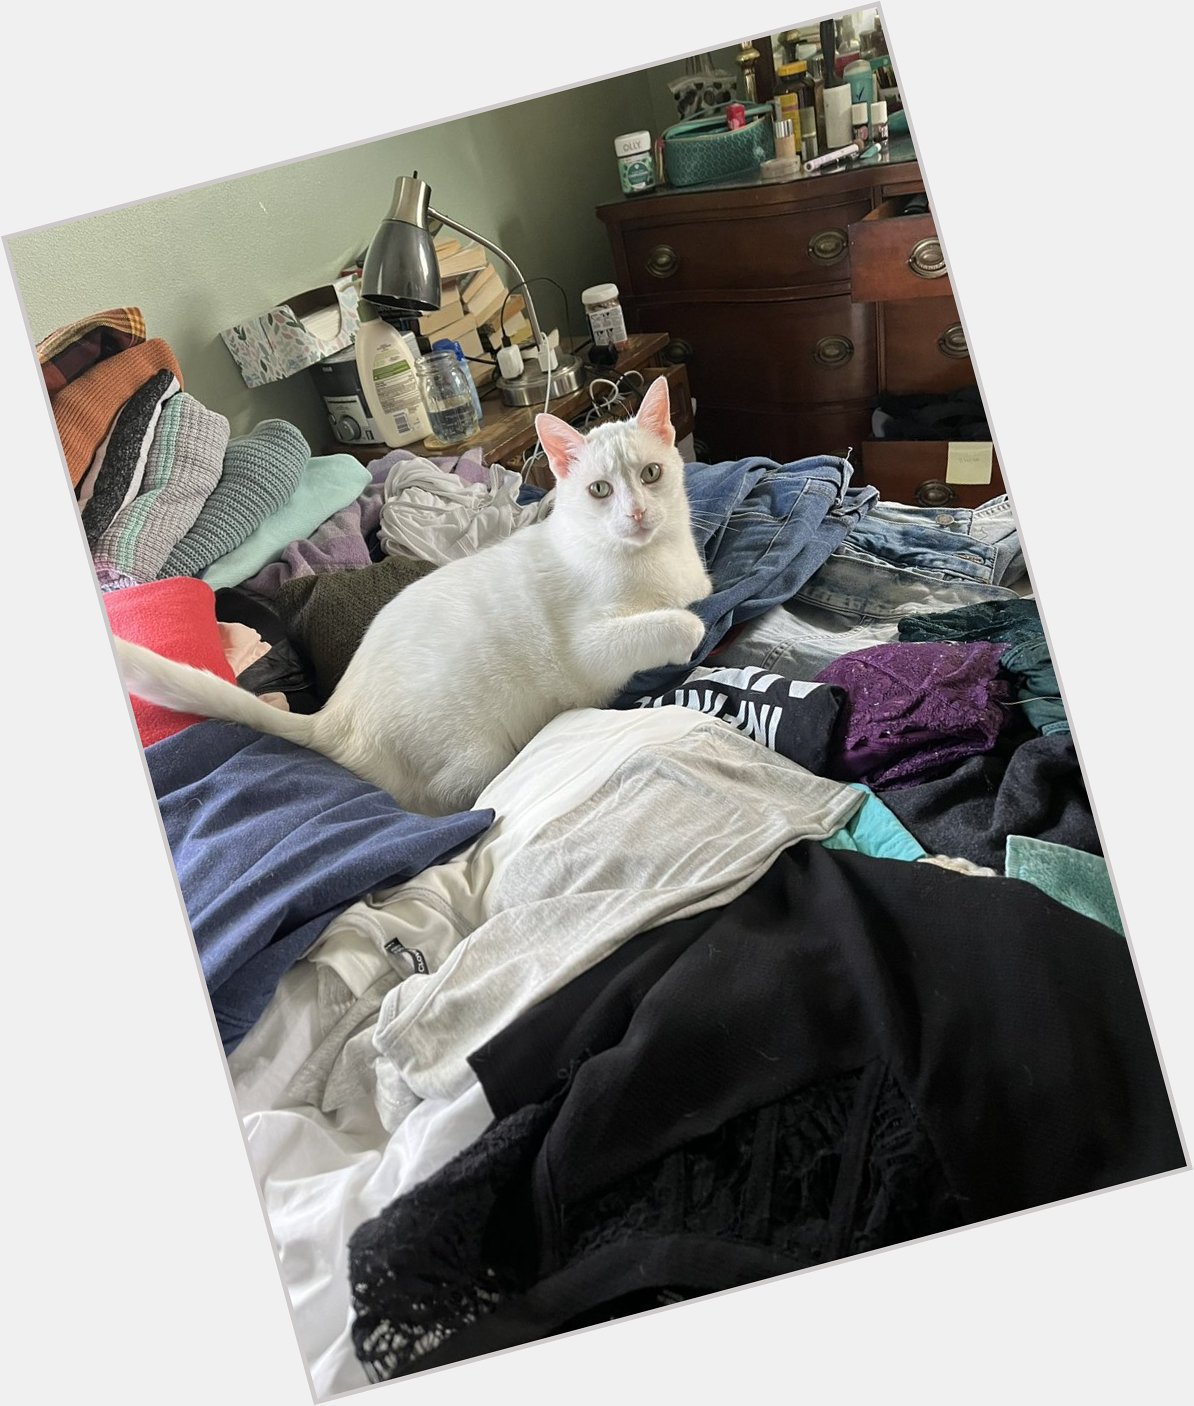  Happy belated birthday! Here is Momo, the prince of laundry 